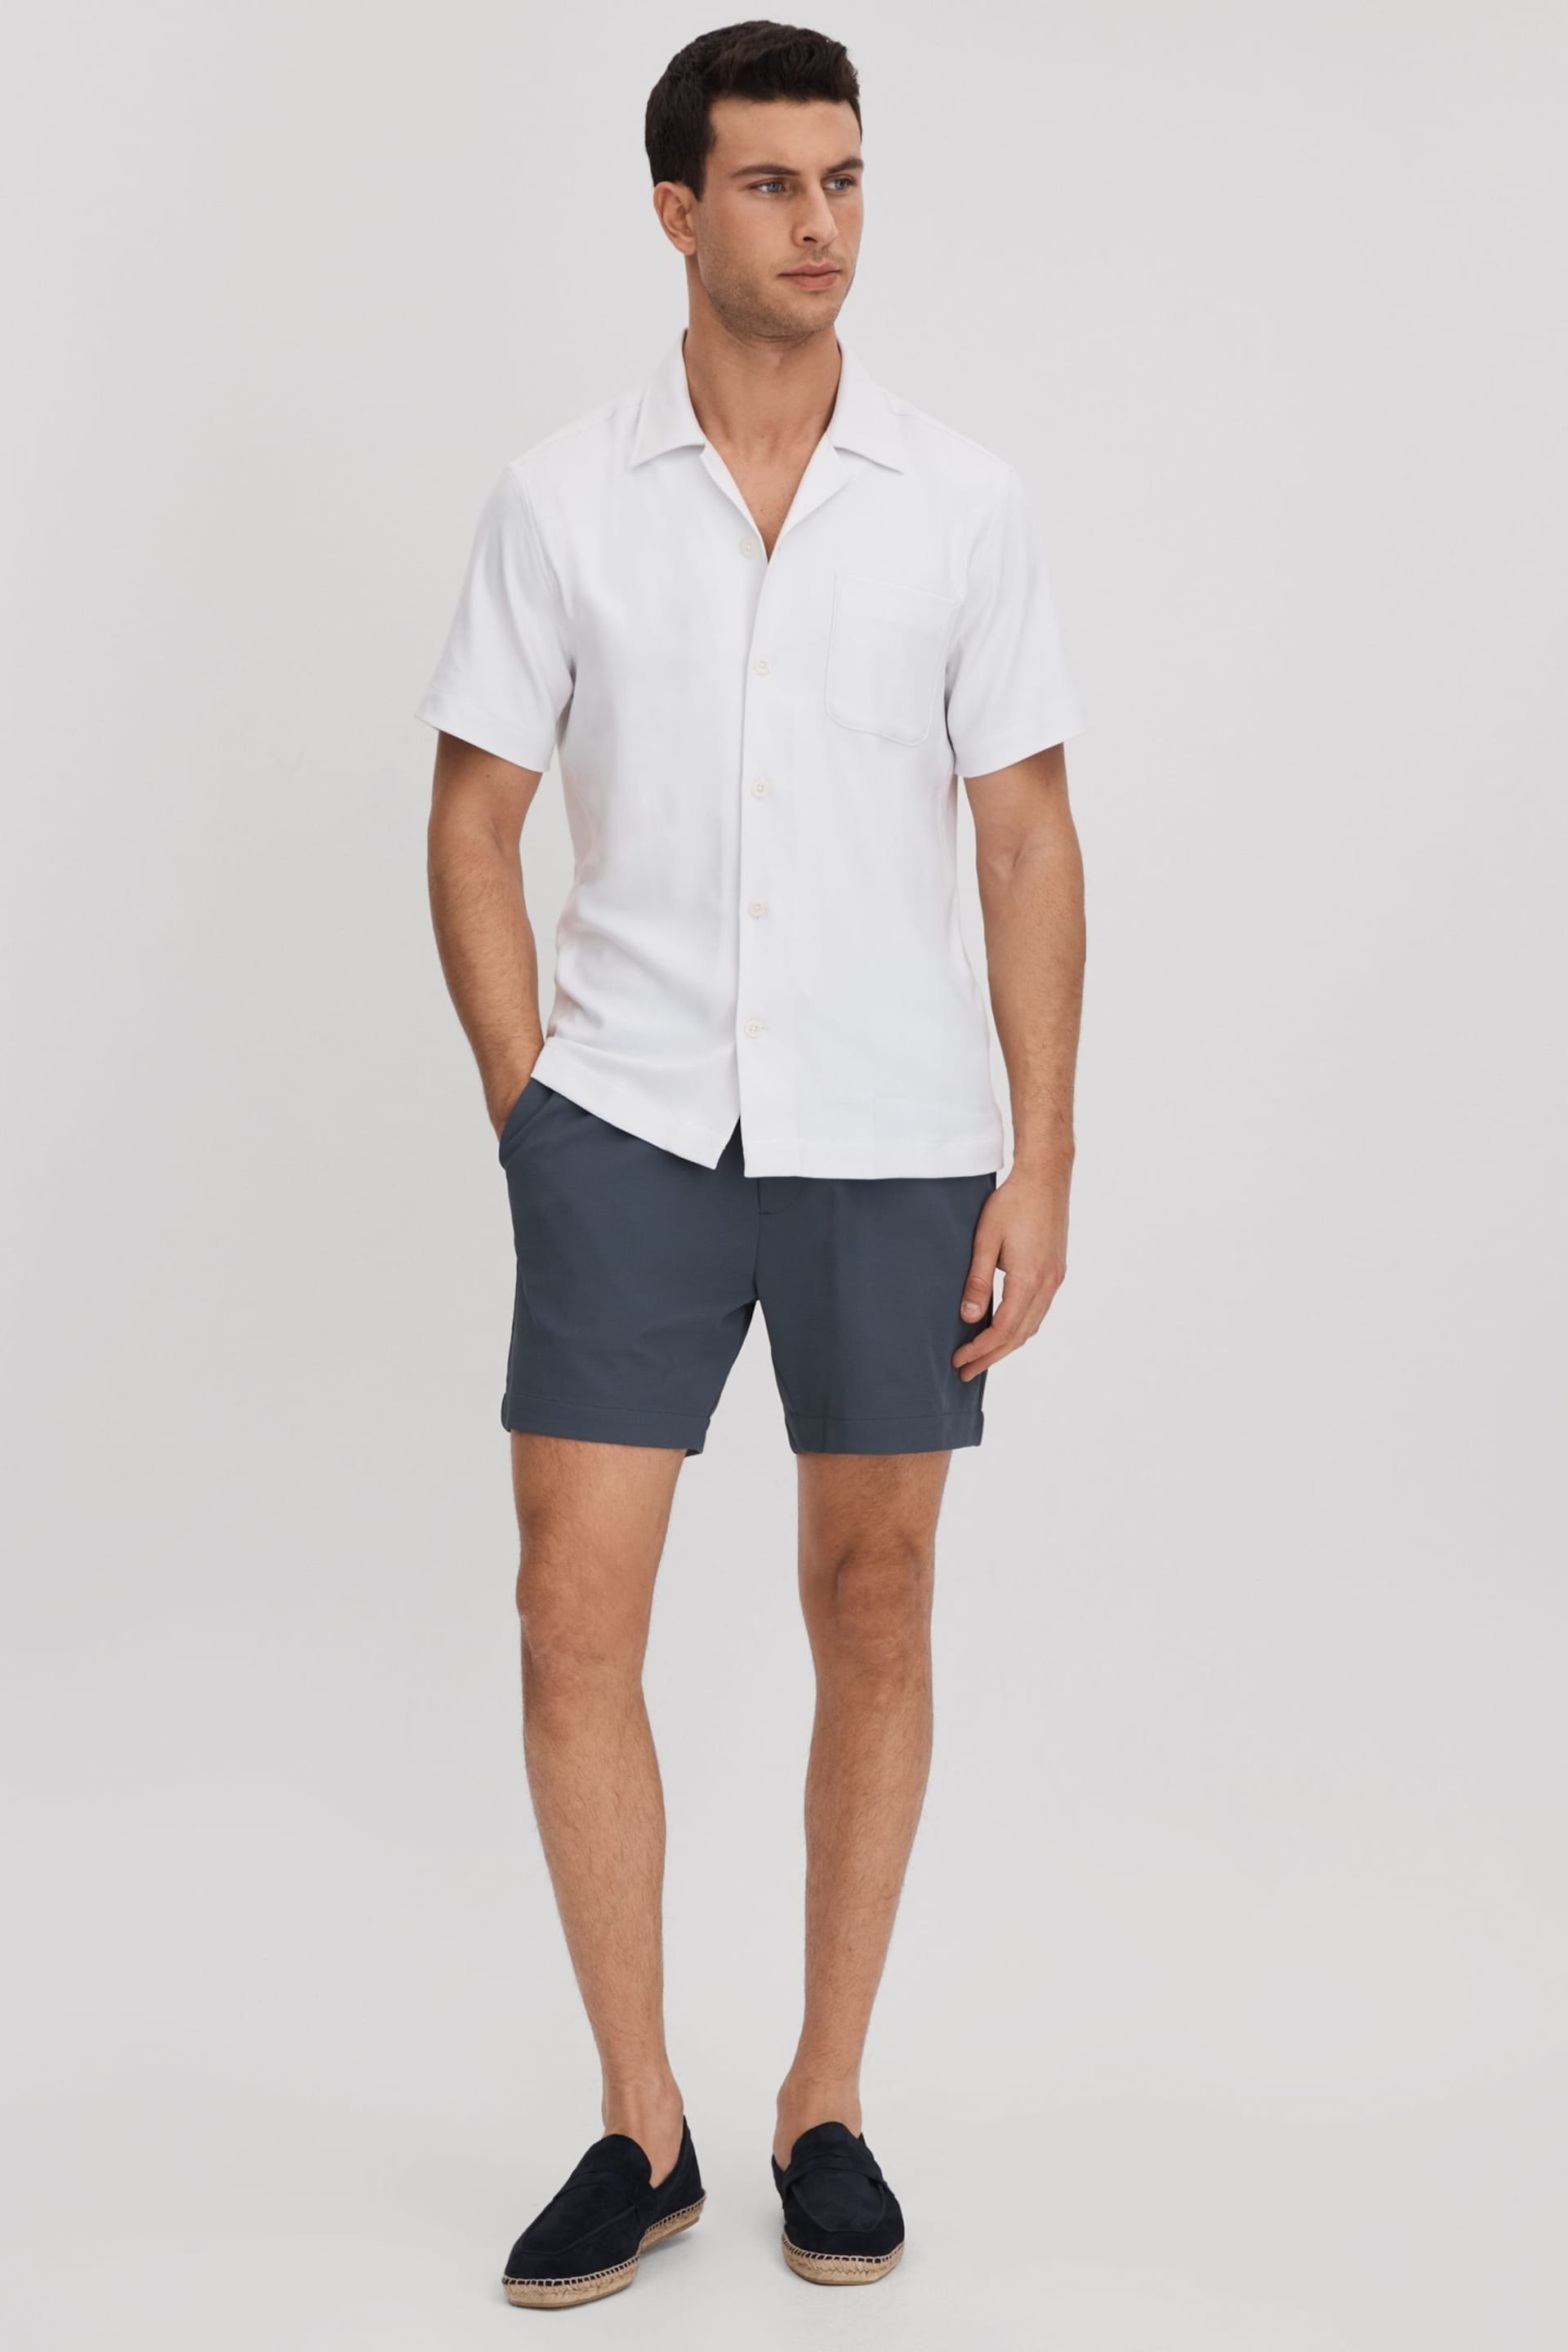 Reiss Airforce Blue Newmark Textured Drawstring Shorts - Image 3 of 6